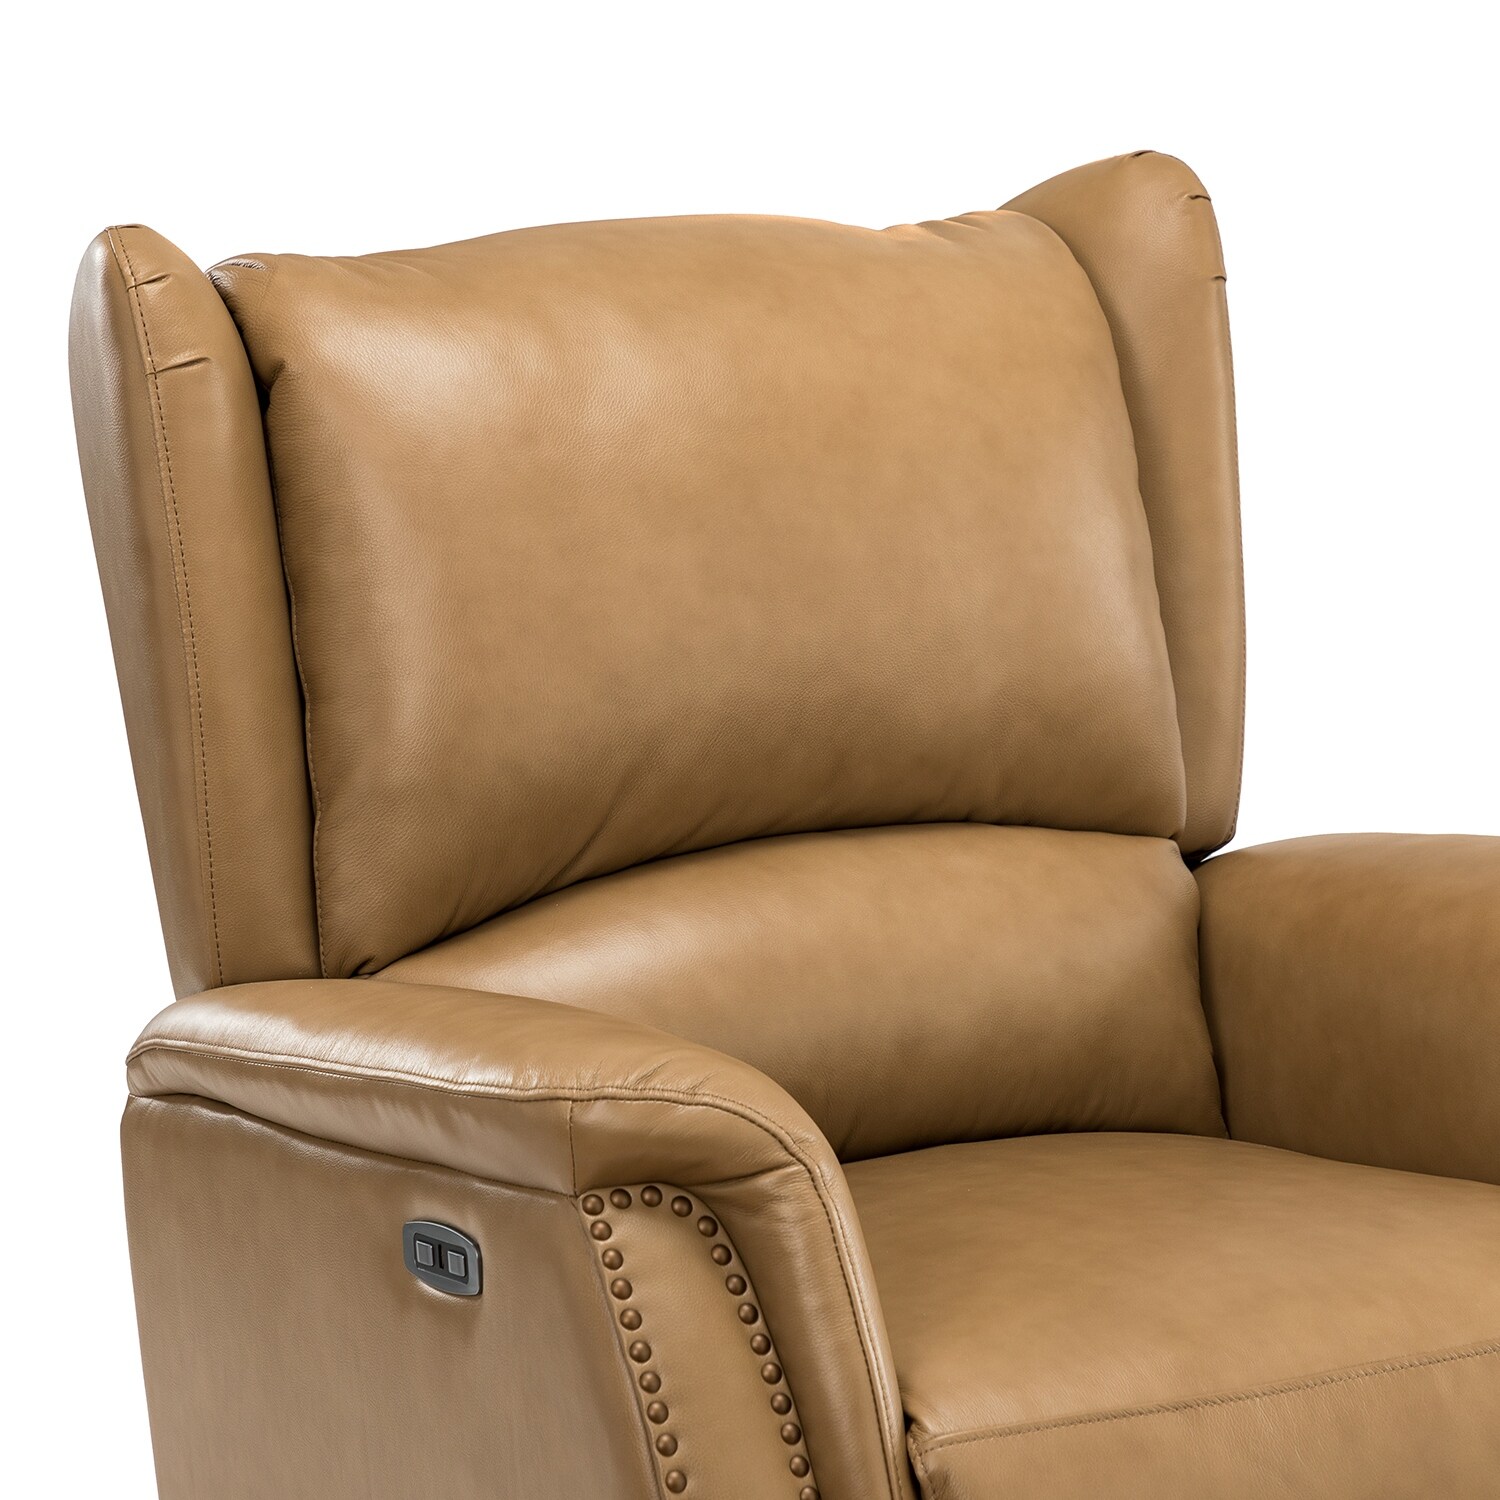 https://ak1.ostkcdn.com/images/products/is/images/direct/d352b0a430ceb8b4aec5f1ee4af47ad33f91f86b/Eliseo-Genuine-Leather-Power-Recliner-with-Wingback-Design.jpg